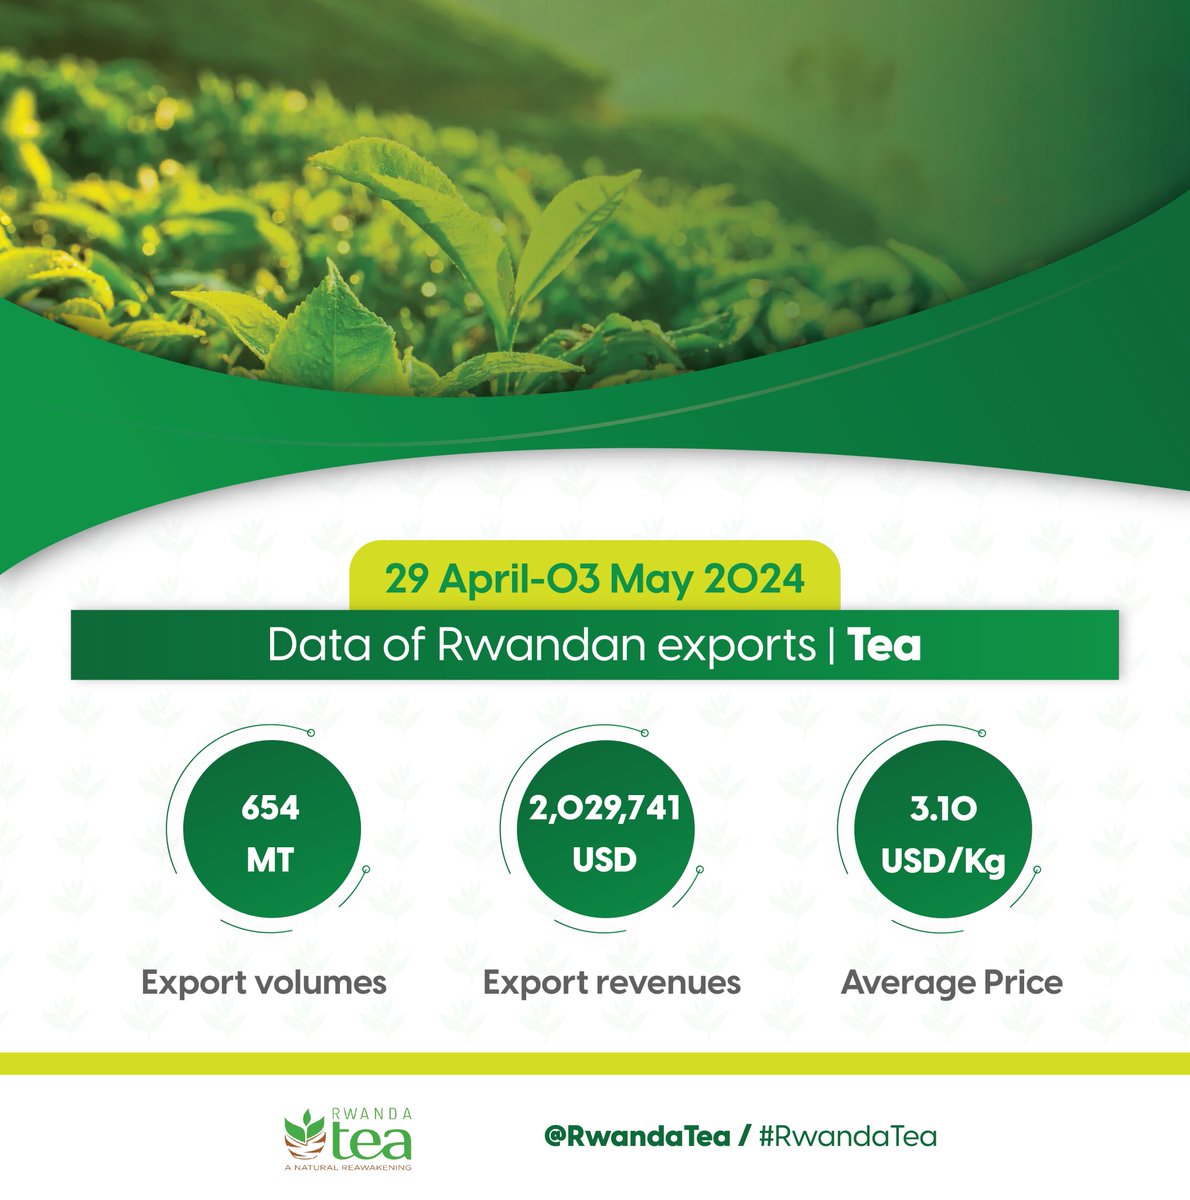 Rwandan tea keeps expanding horizons. Check out the latest exports figures (29th April to 03rd May 2024) and stay tuned for upcoming updates. #RwandaAgriExports